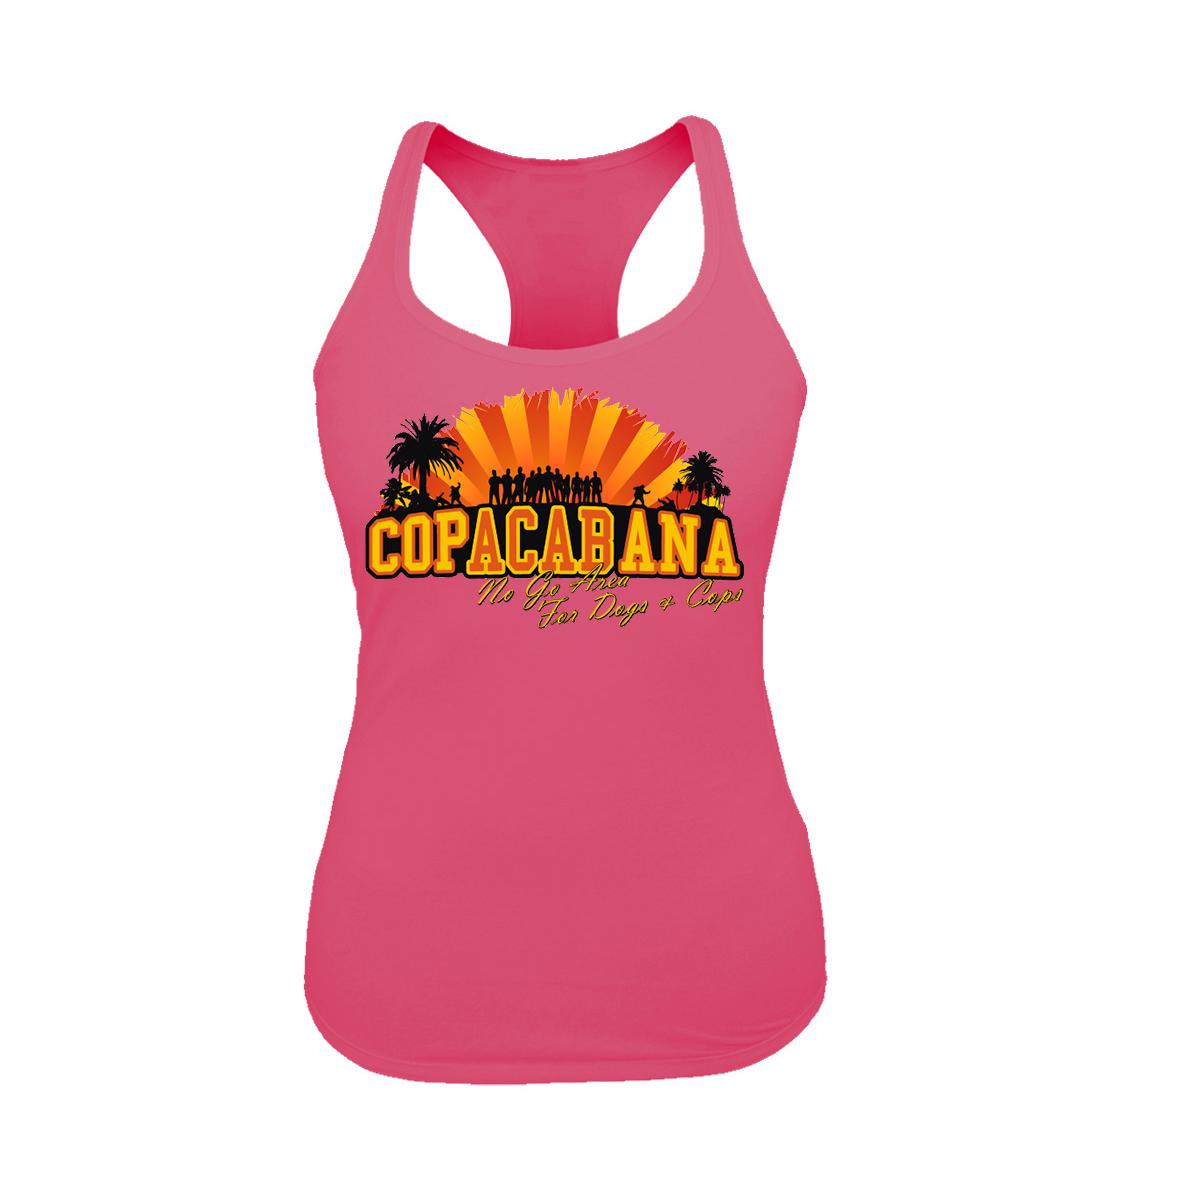 Copacabana - No go Area for Dogs and Cops - Frauen Tank Top - pink